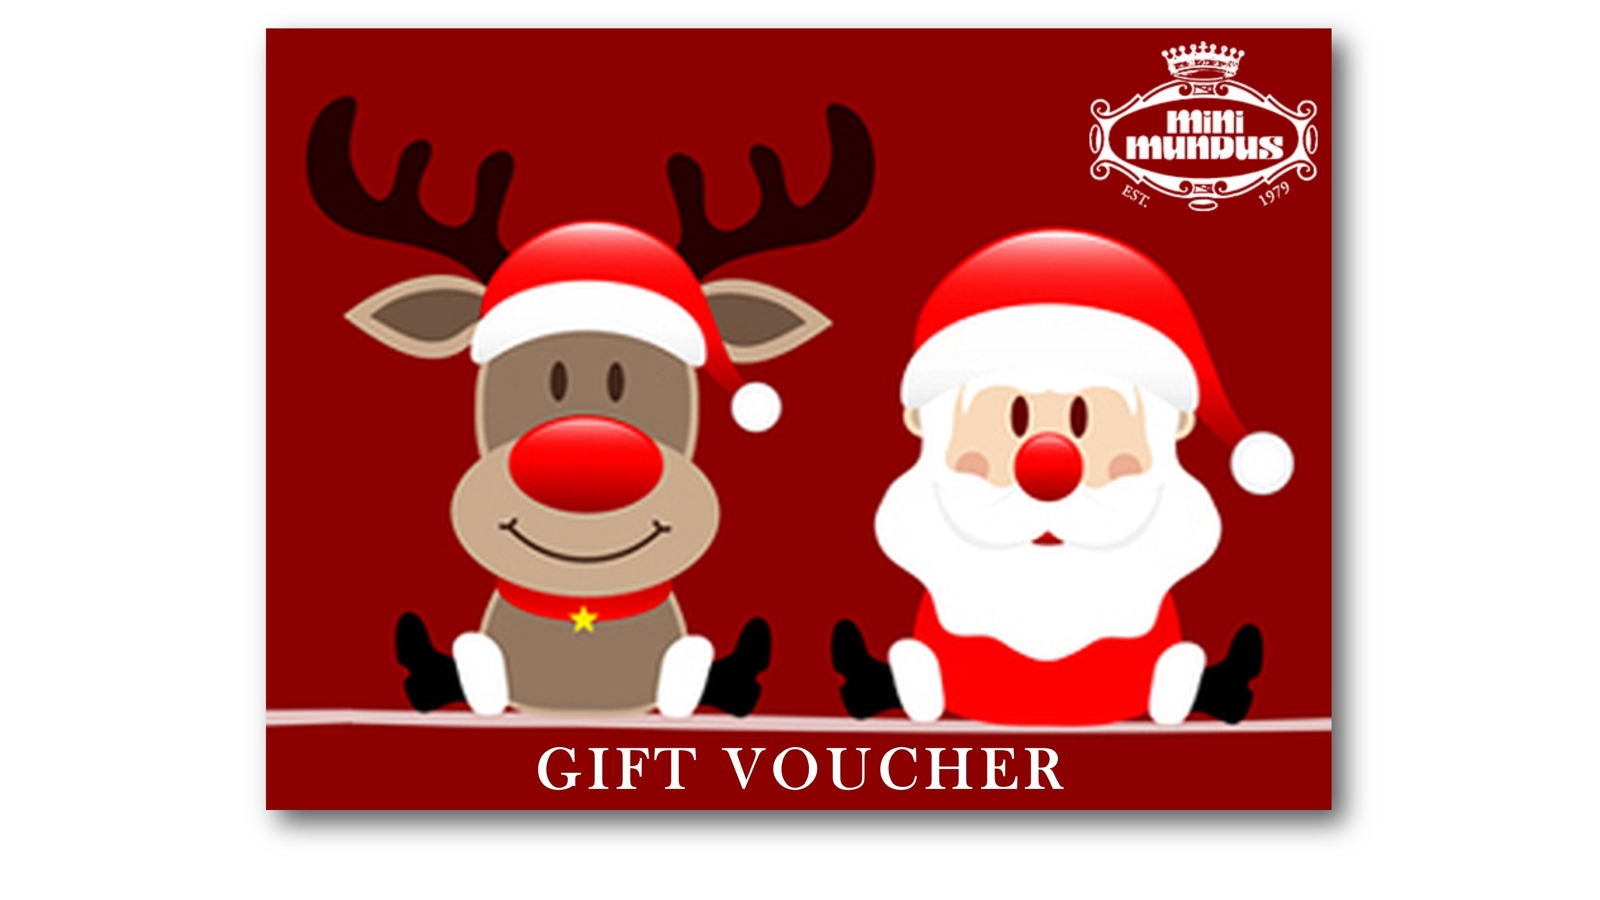 Gift vouchers for self-printing - Ordered today - Delivered today!